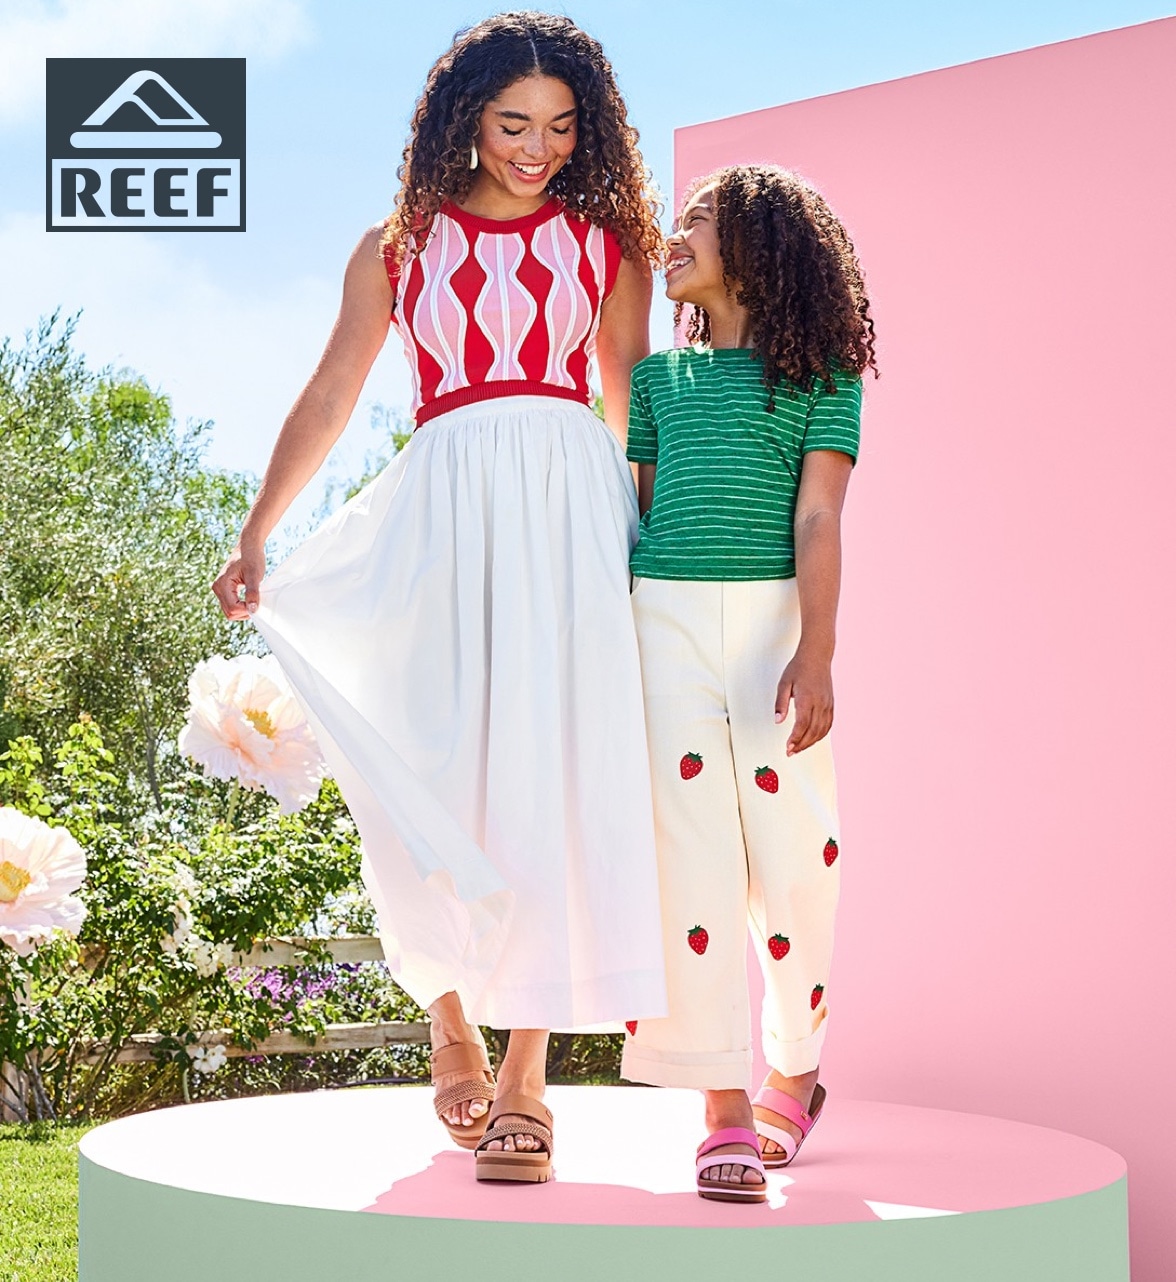 mother and daughter in spring outfits wearing reef sandals with reef logo in upper left corner